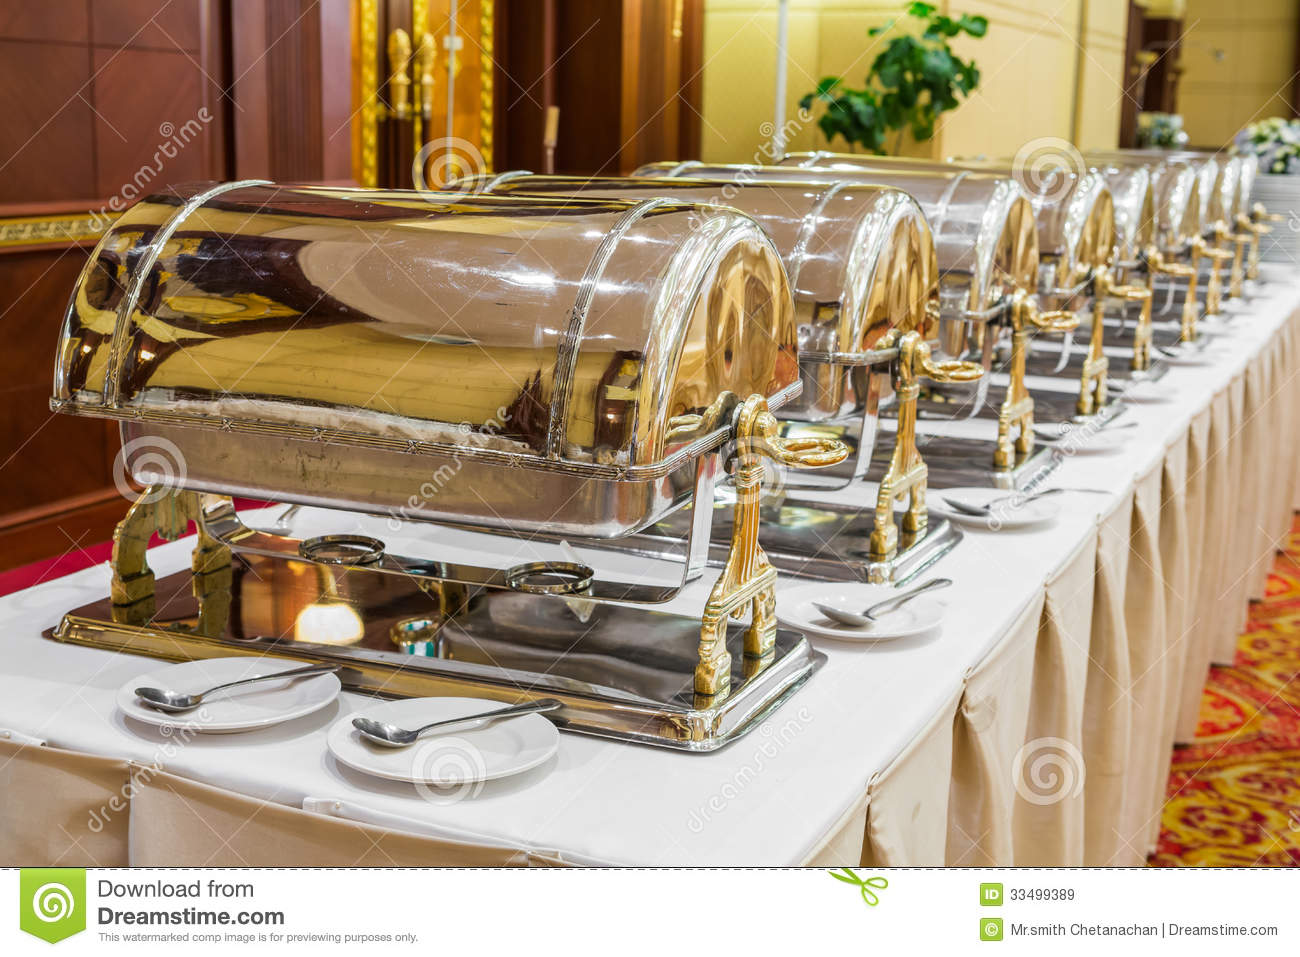 Warming Trays For Buffet Line Royalty Free Stock Images   Image